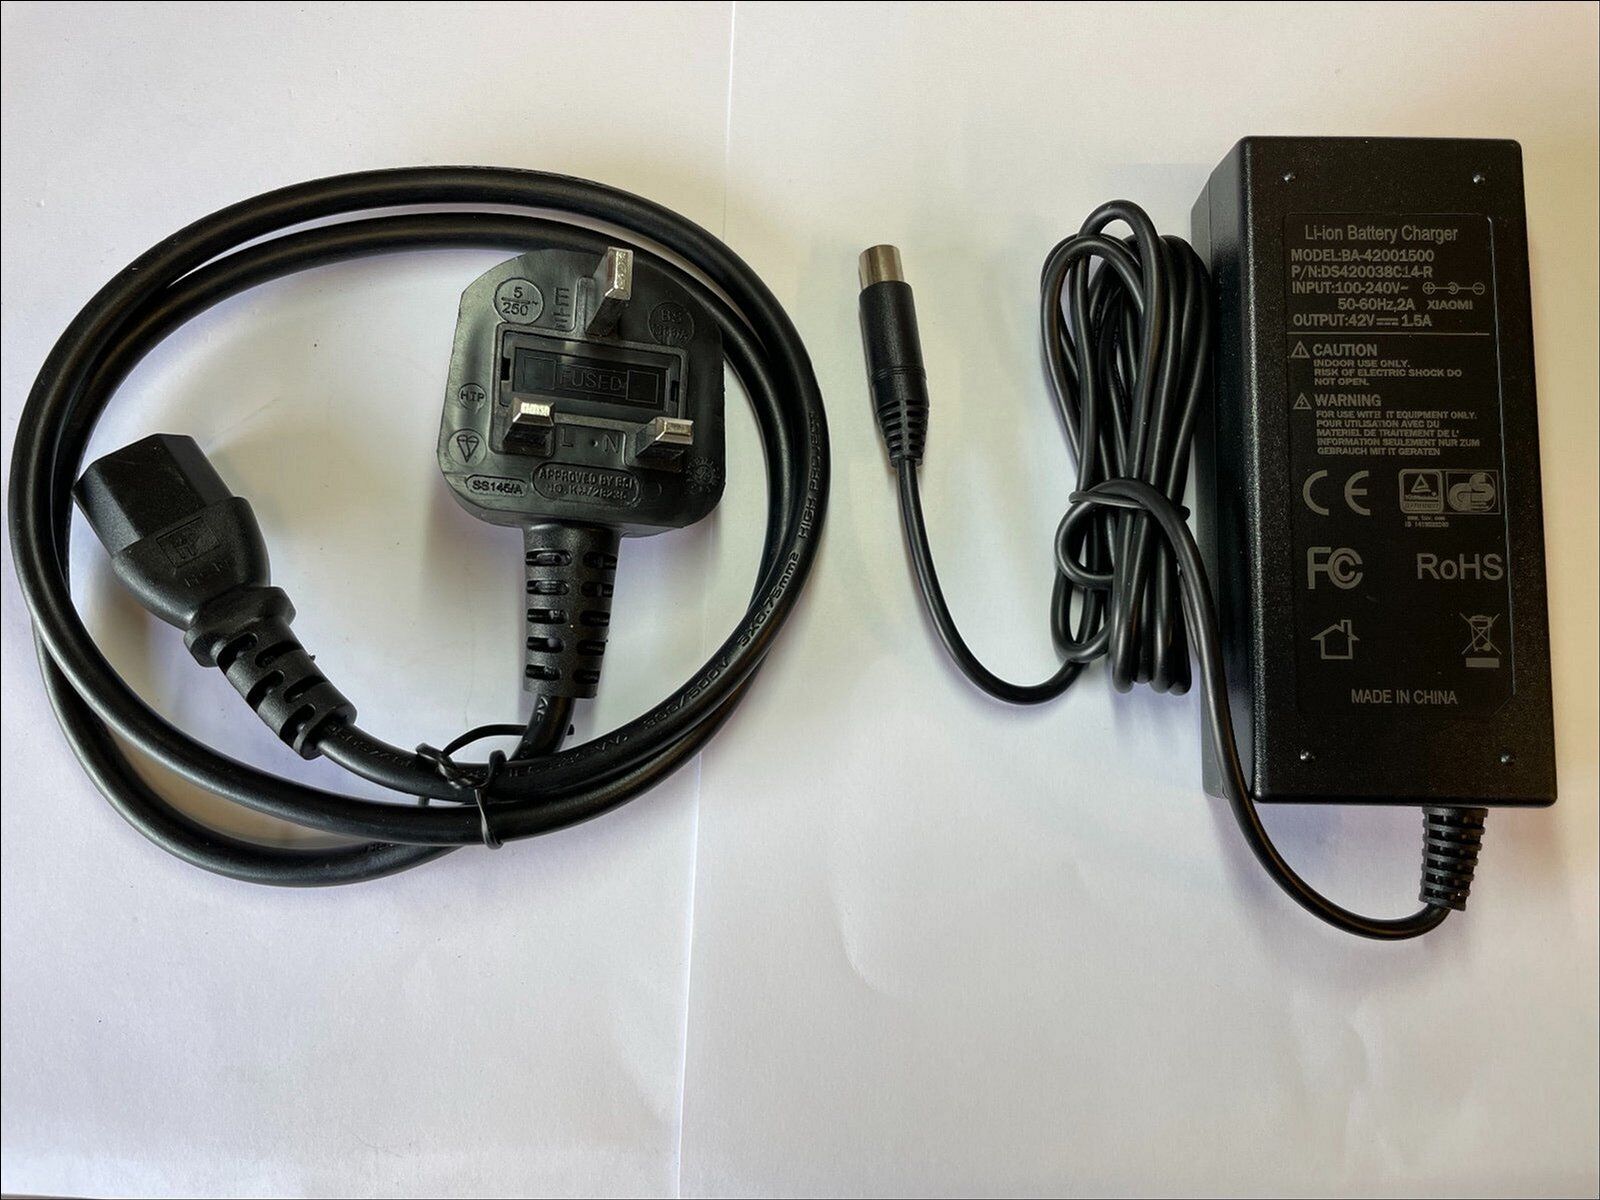 Replacement 42V 1.5A AC-DC Power Adaptor Charger for CityBlitz E-Scooter CB048X MPN BA-4200150 Bundled Items Power Cabl